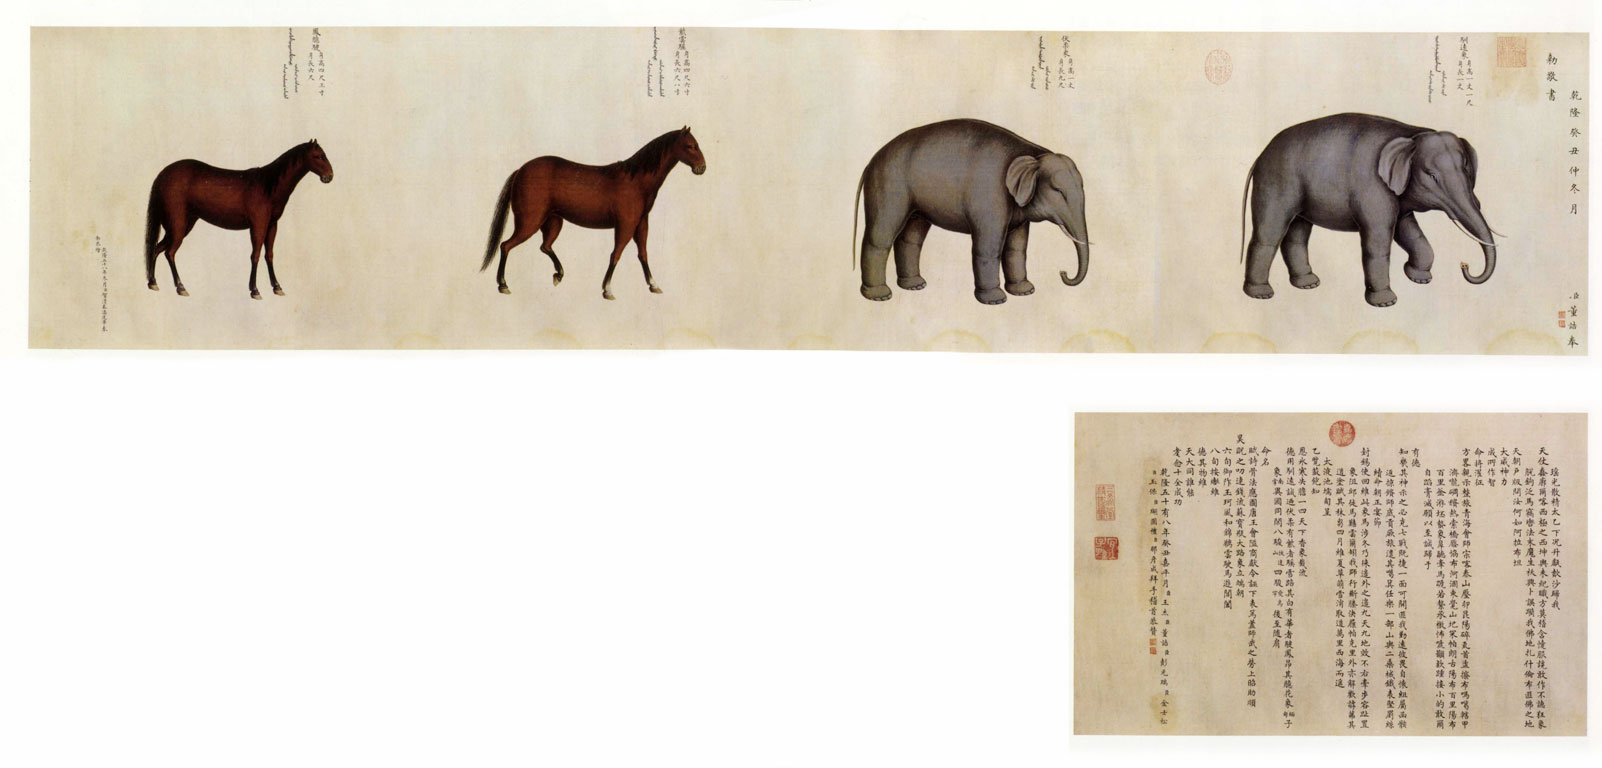 On the top, two horses and two elephants, all facing to the right; on the bottom, Chinese text